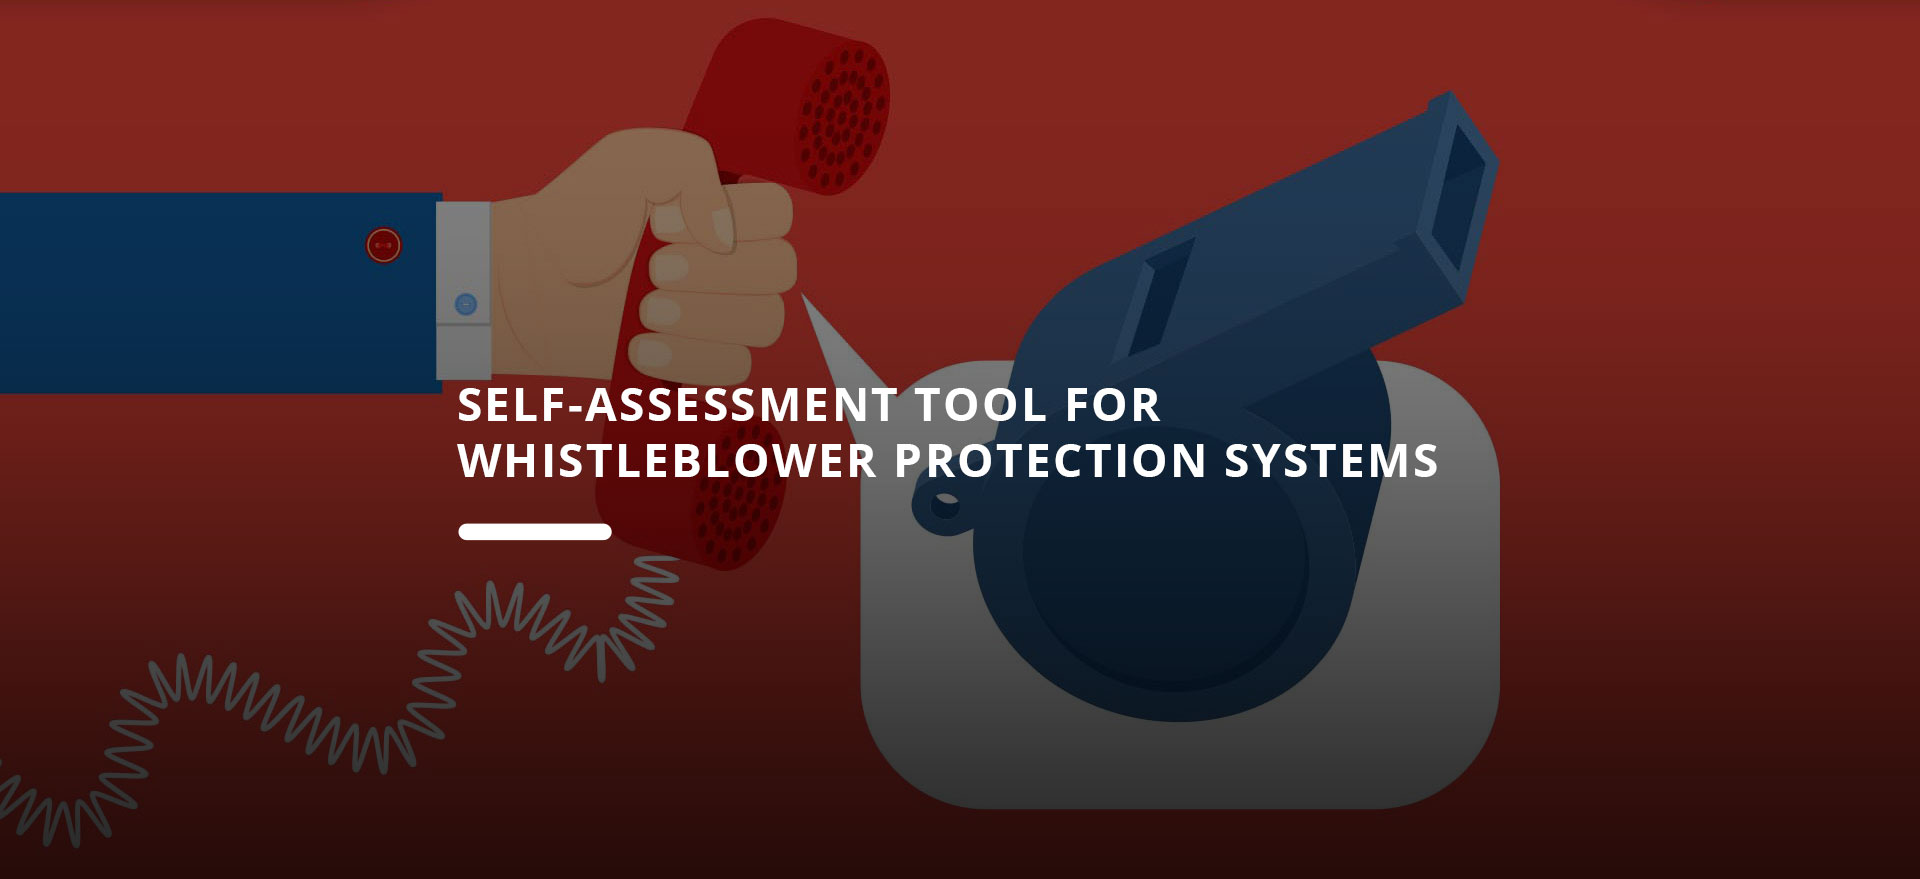 Self-assessment Tool for Whistleblower Protection Systems